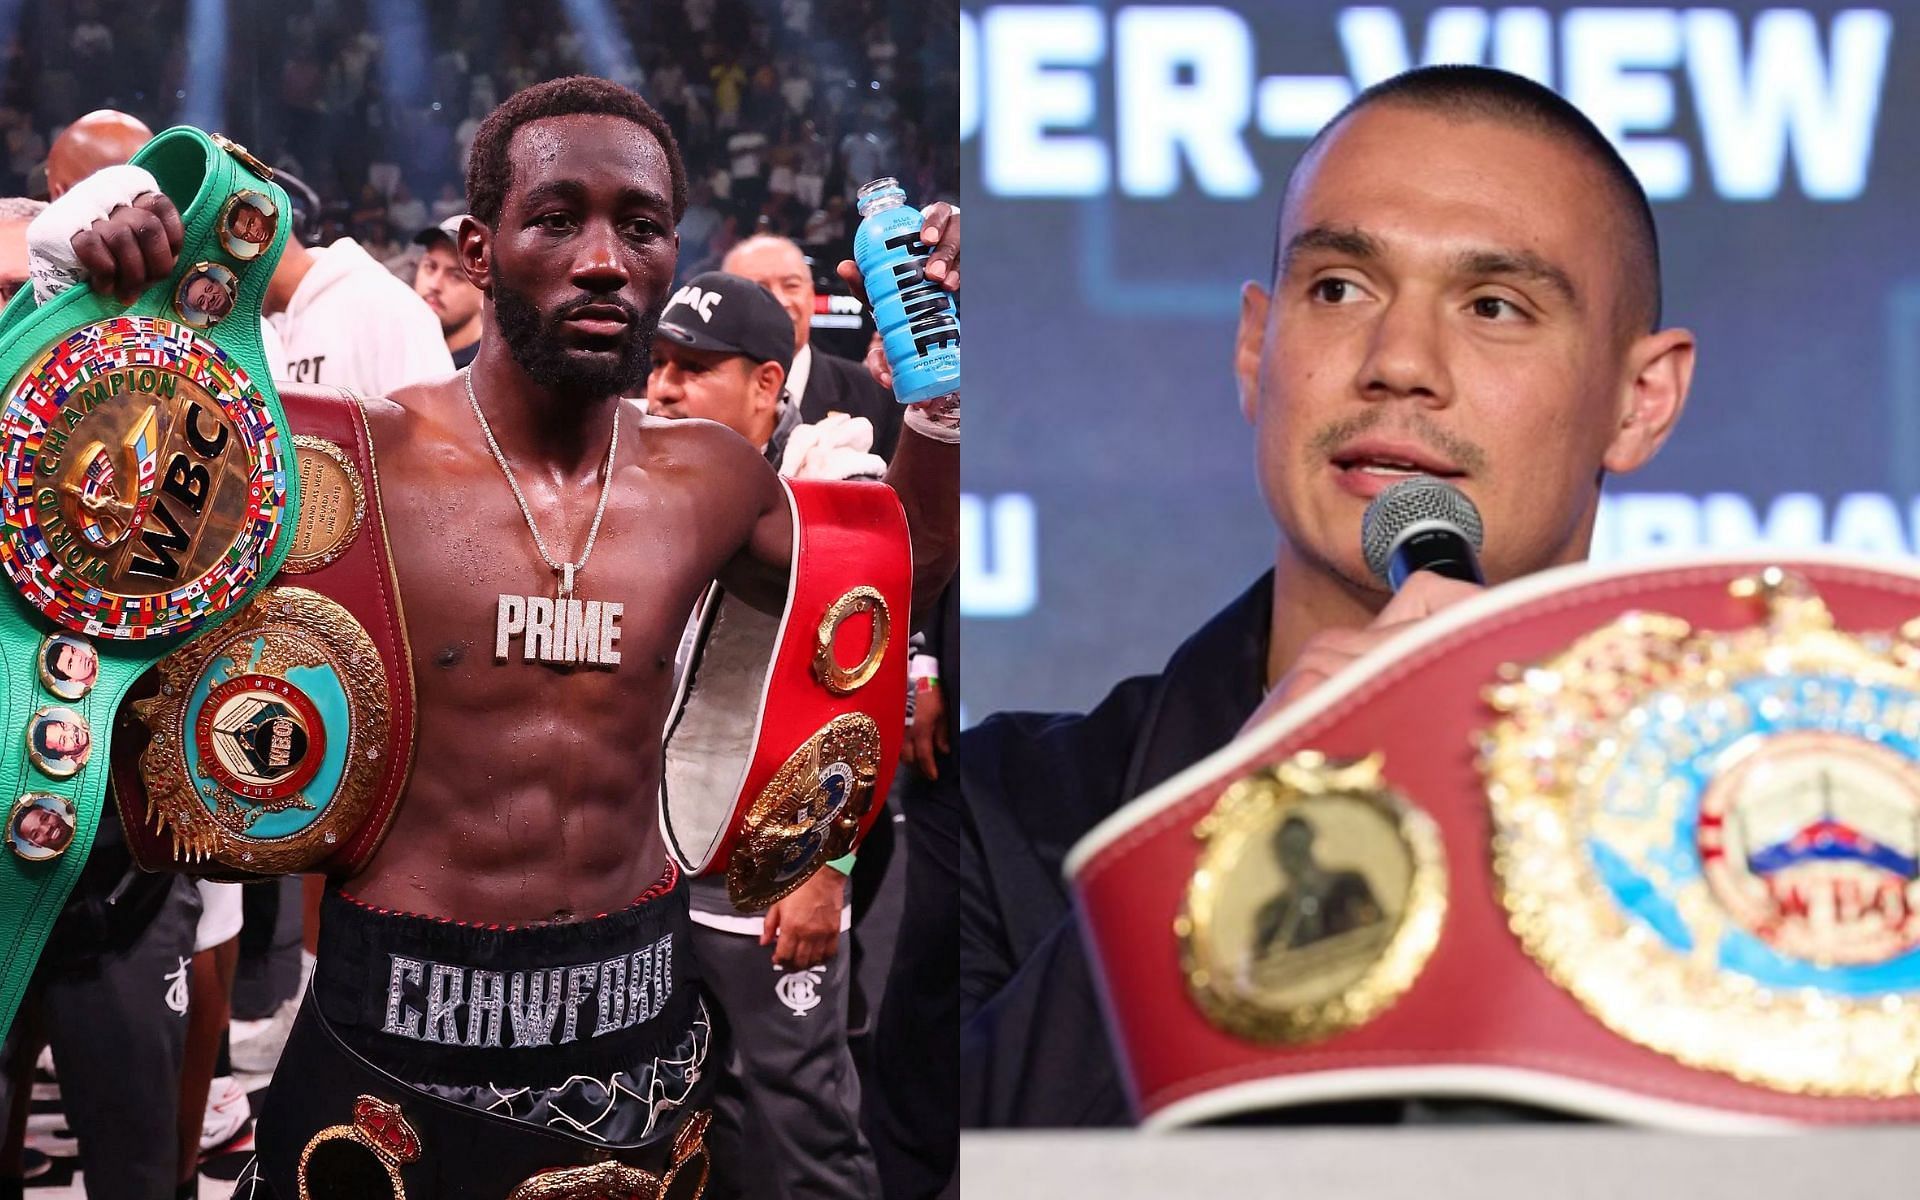 Terence Crawford (left) is now the WBO mandatory challenger for Tim Tszyu (right) [Images Courtesy: @GettyImages, @timtszyu on Instagram]